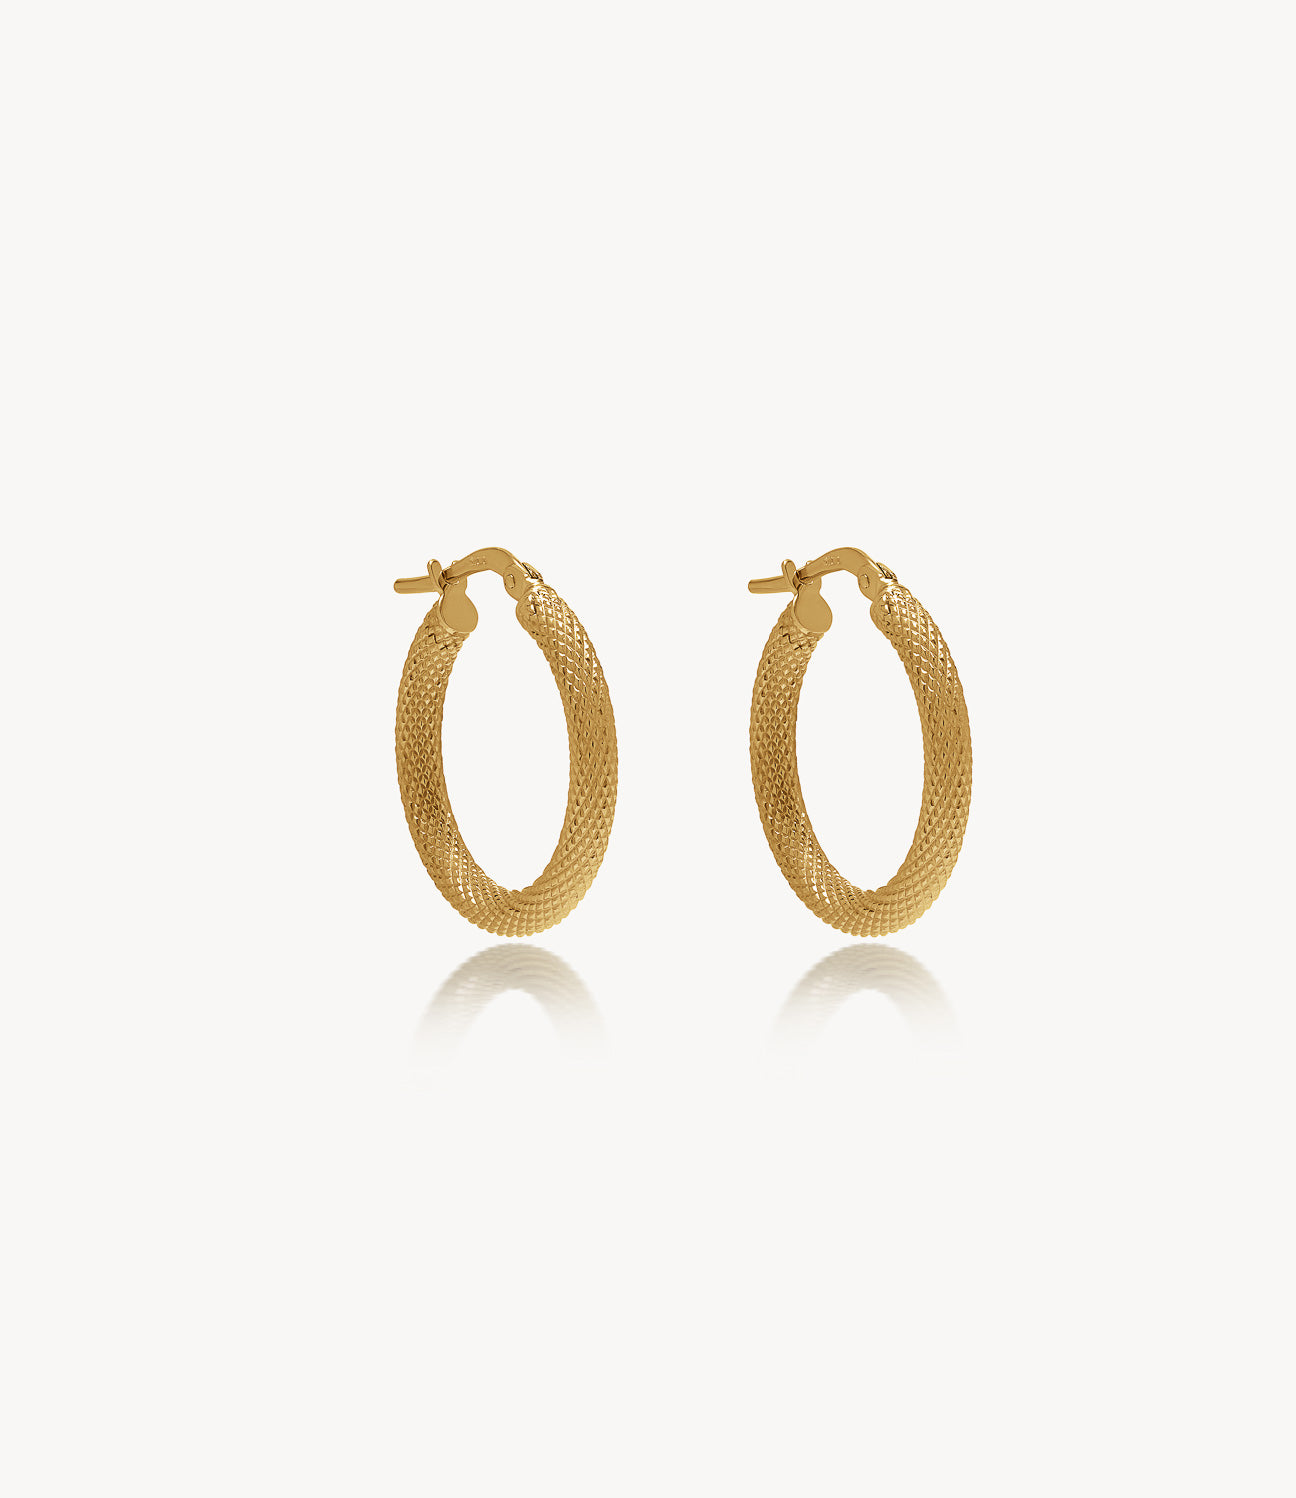 The Gold Snake Hoops